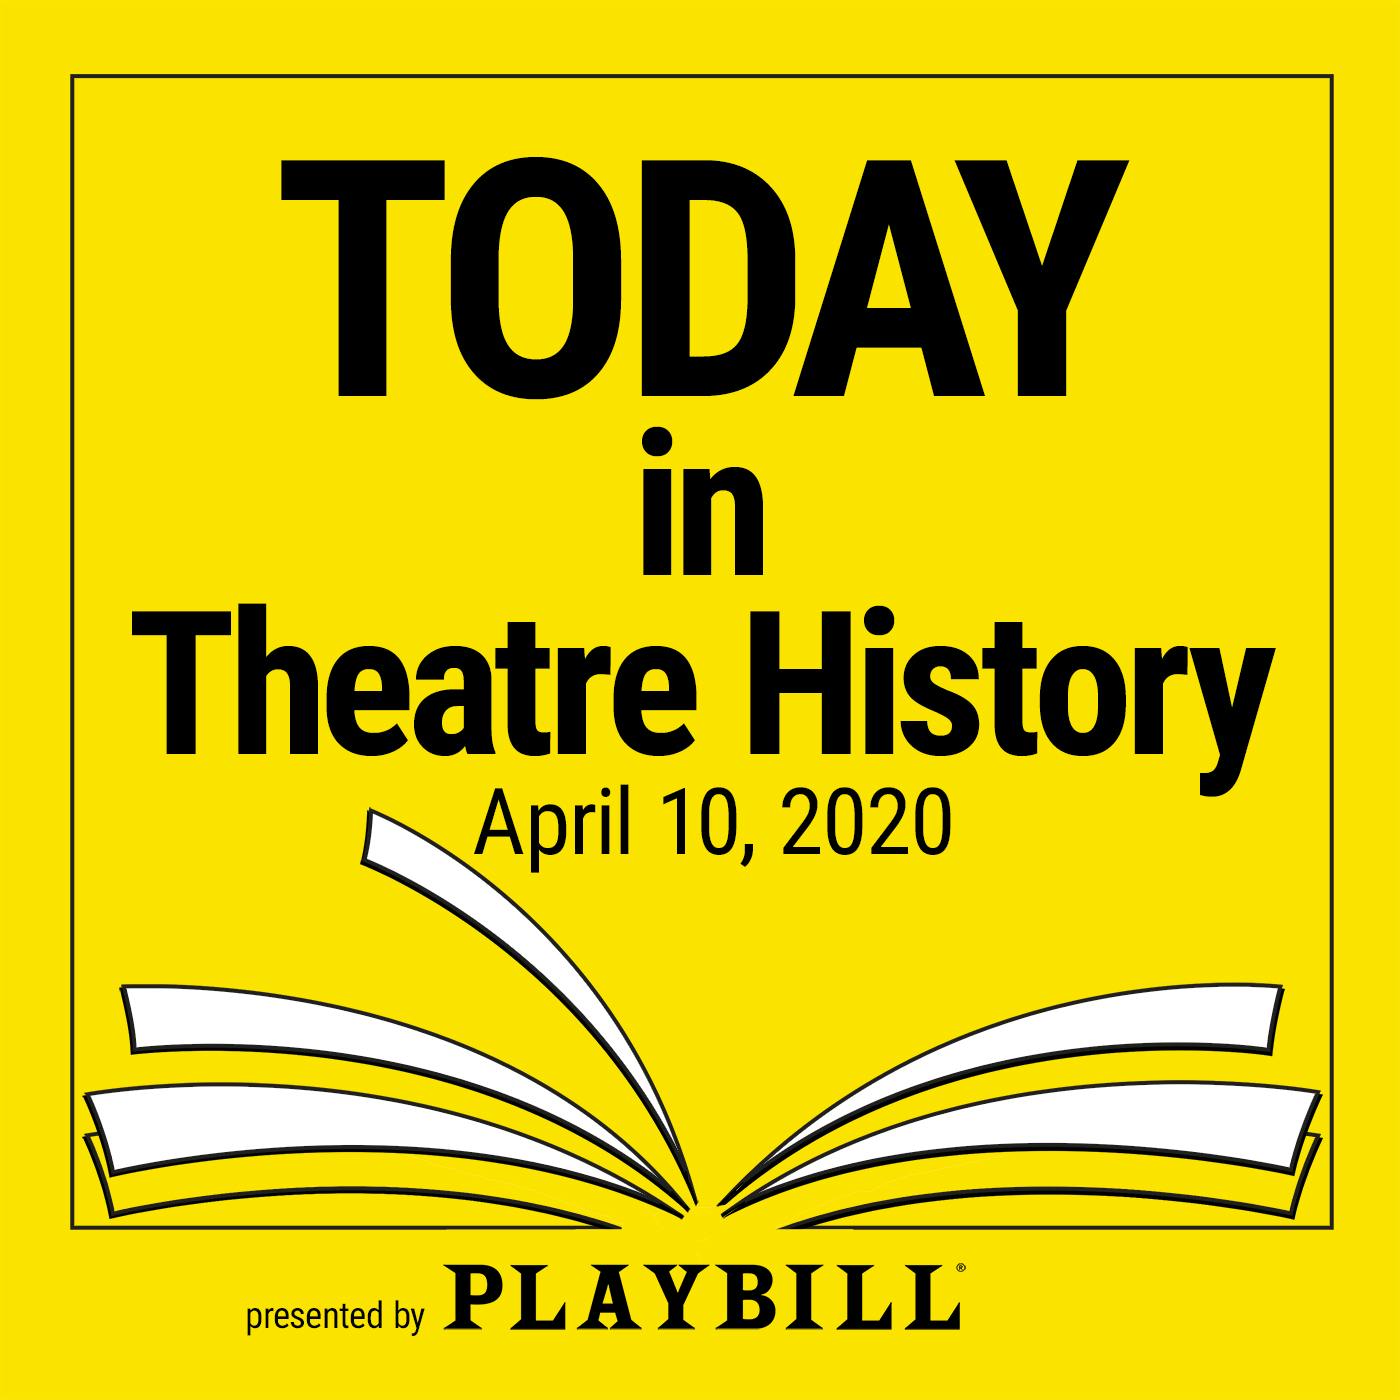 April 10, 2020: Antonio Banderas and Aaron Tveit made us swoon in musicals, and more